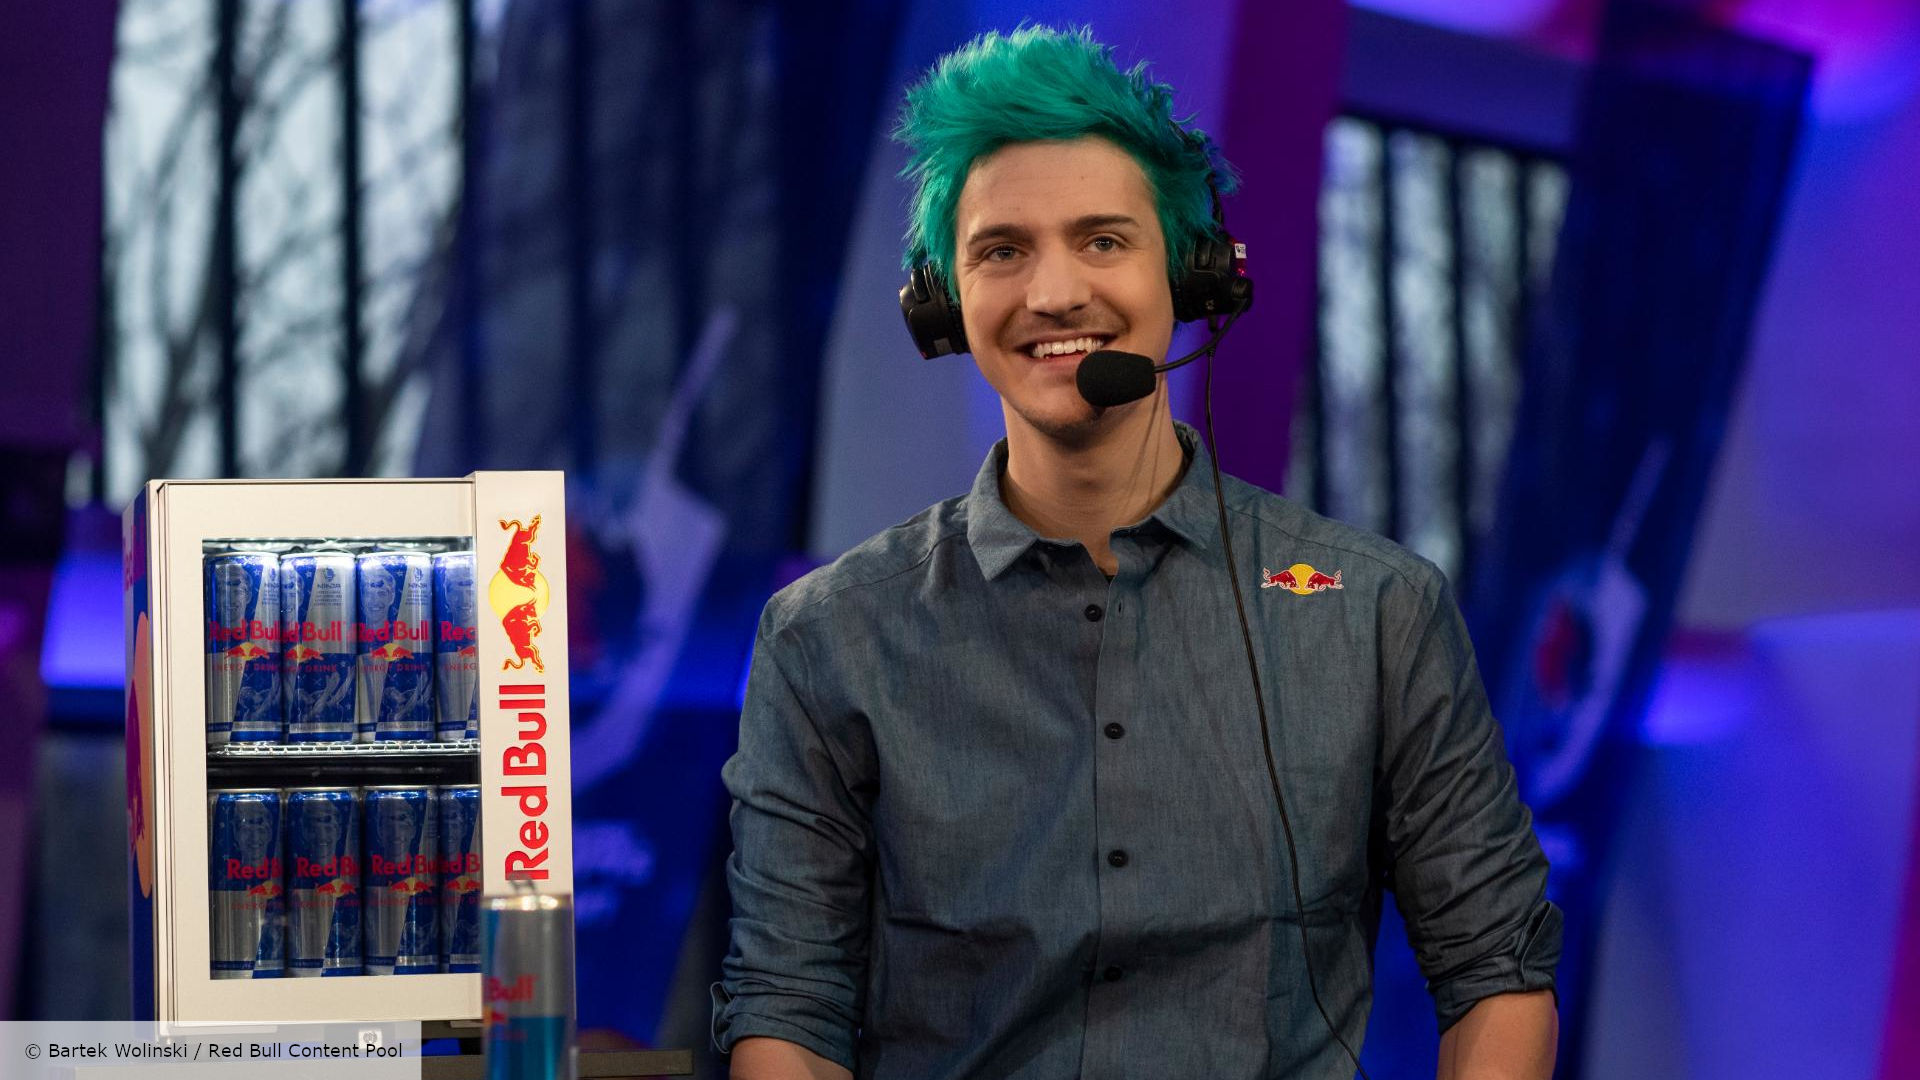 Ninja allegedly made $20-30 million by moving to Mixer